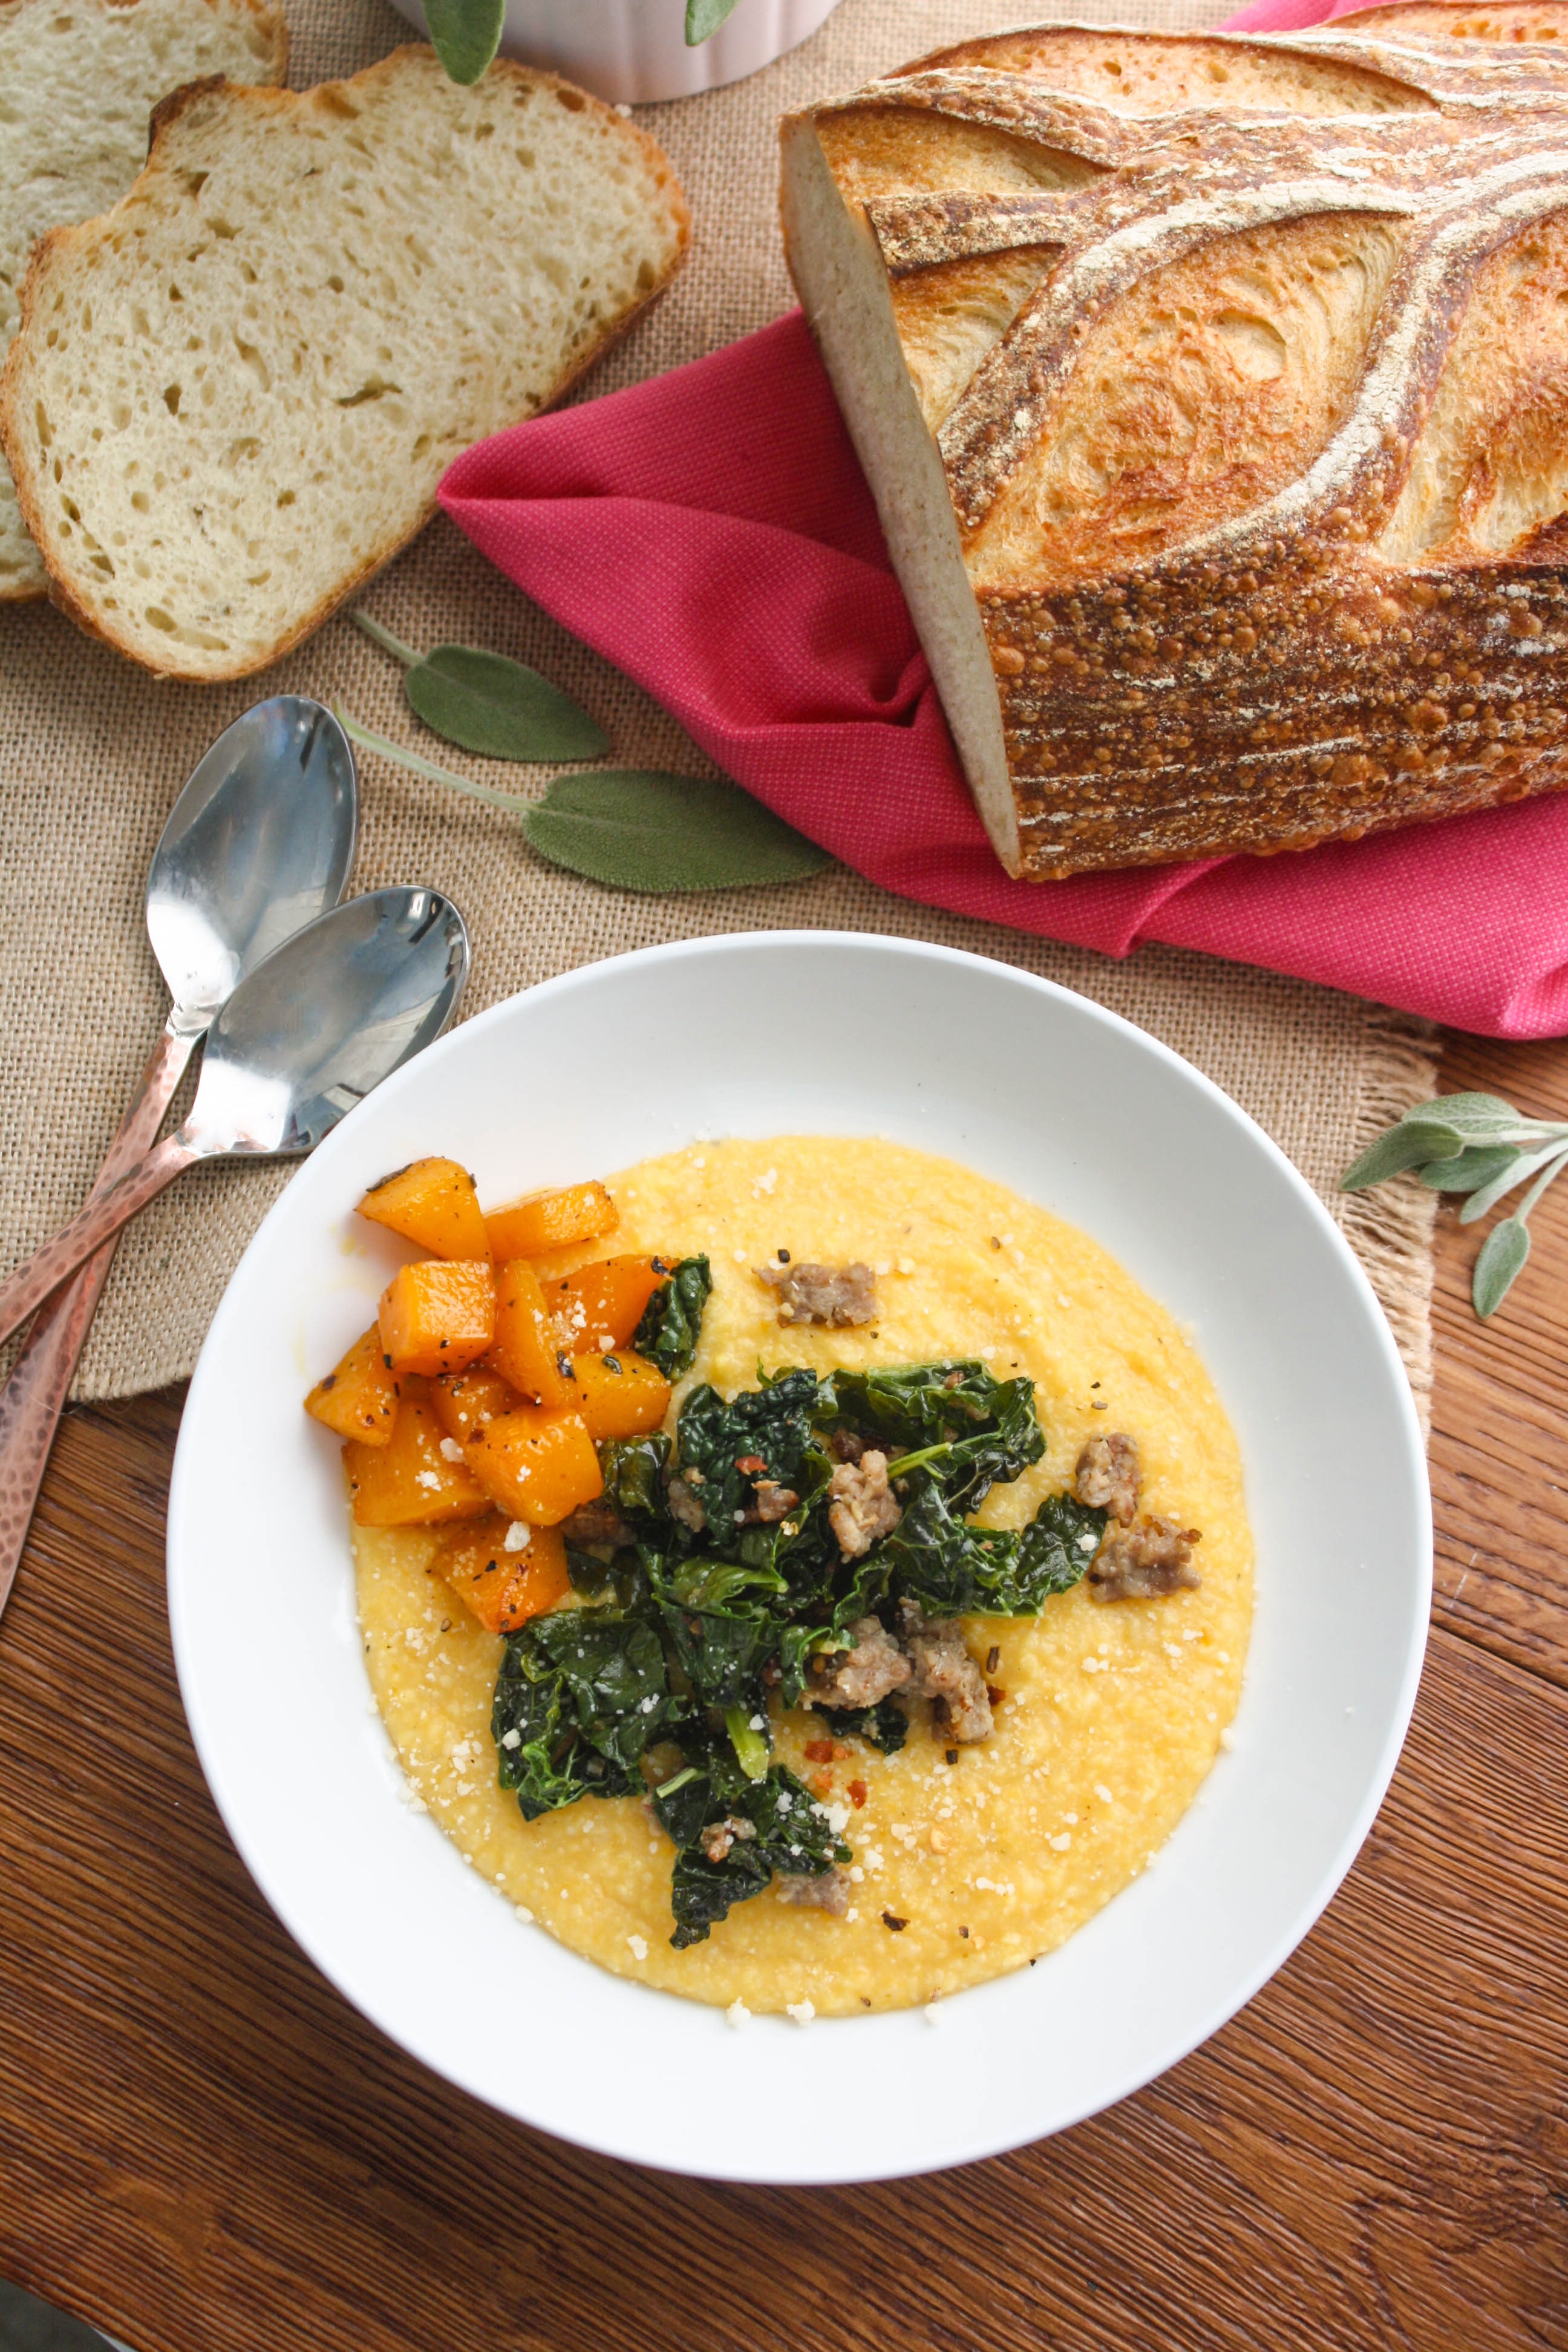 Butternut Squash Grits with Sausage and Kale is a welcome dish to serve when the weather is chilly. These grits are comforting and flavorful.